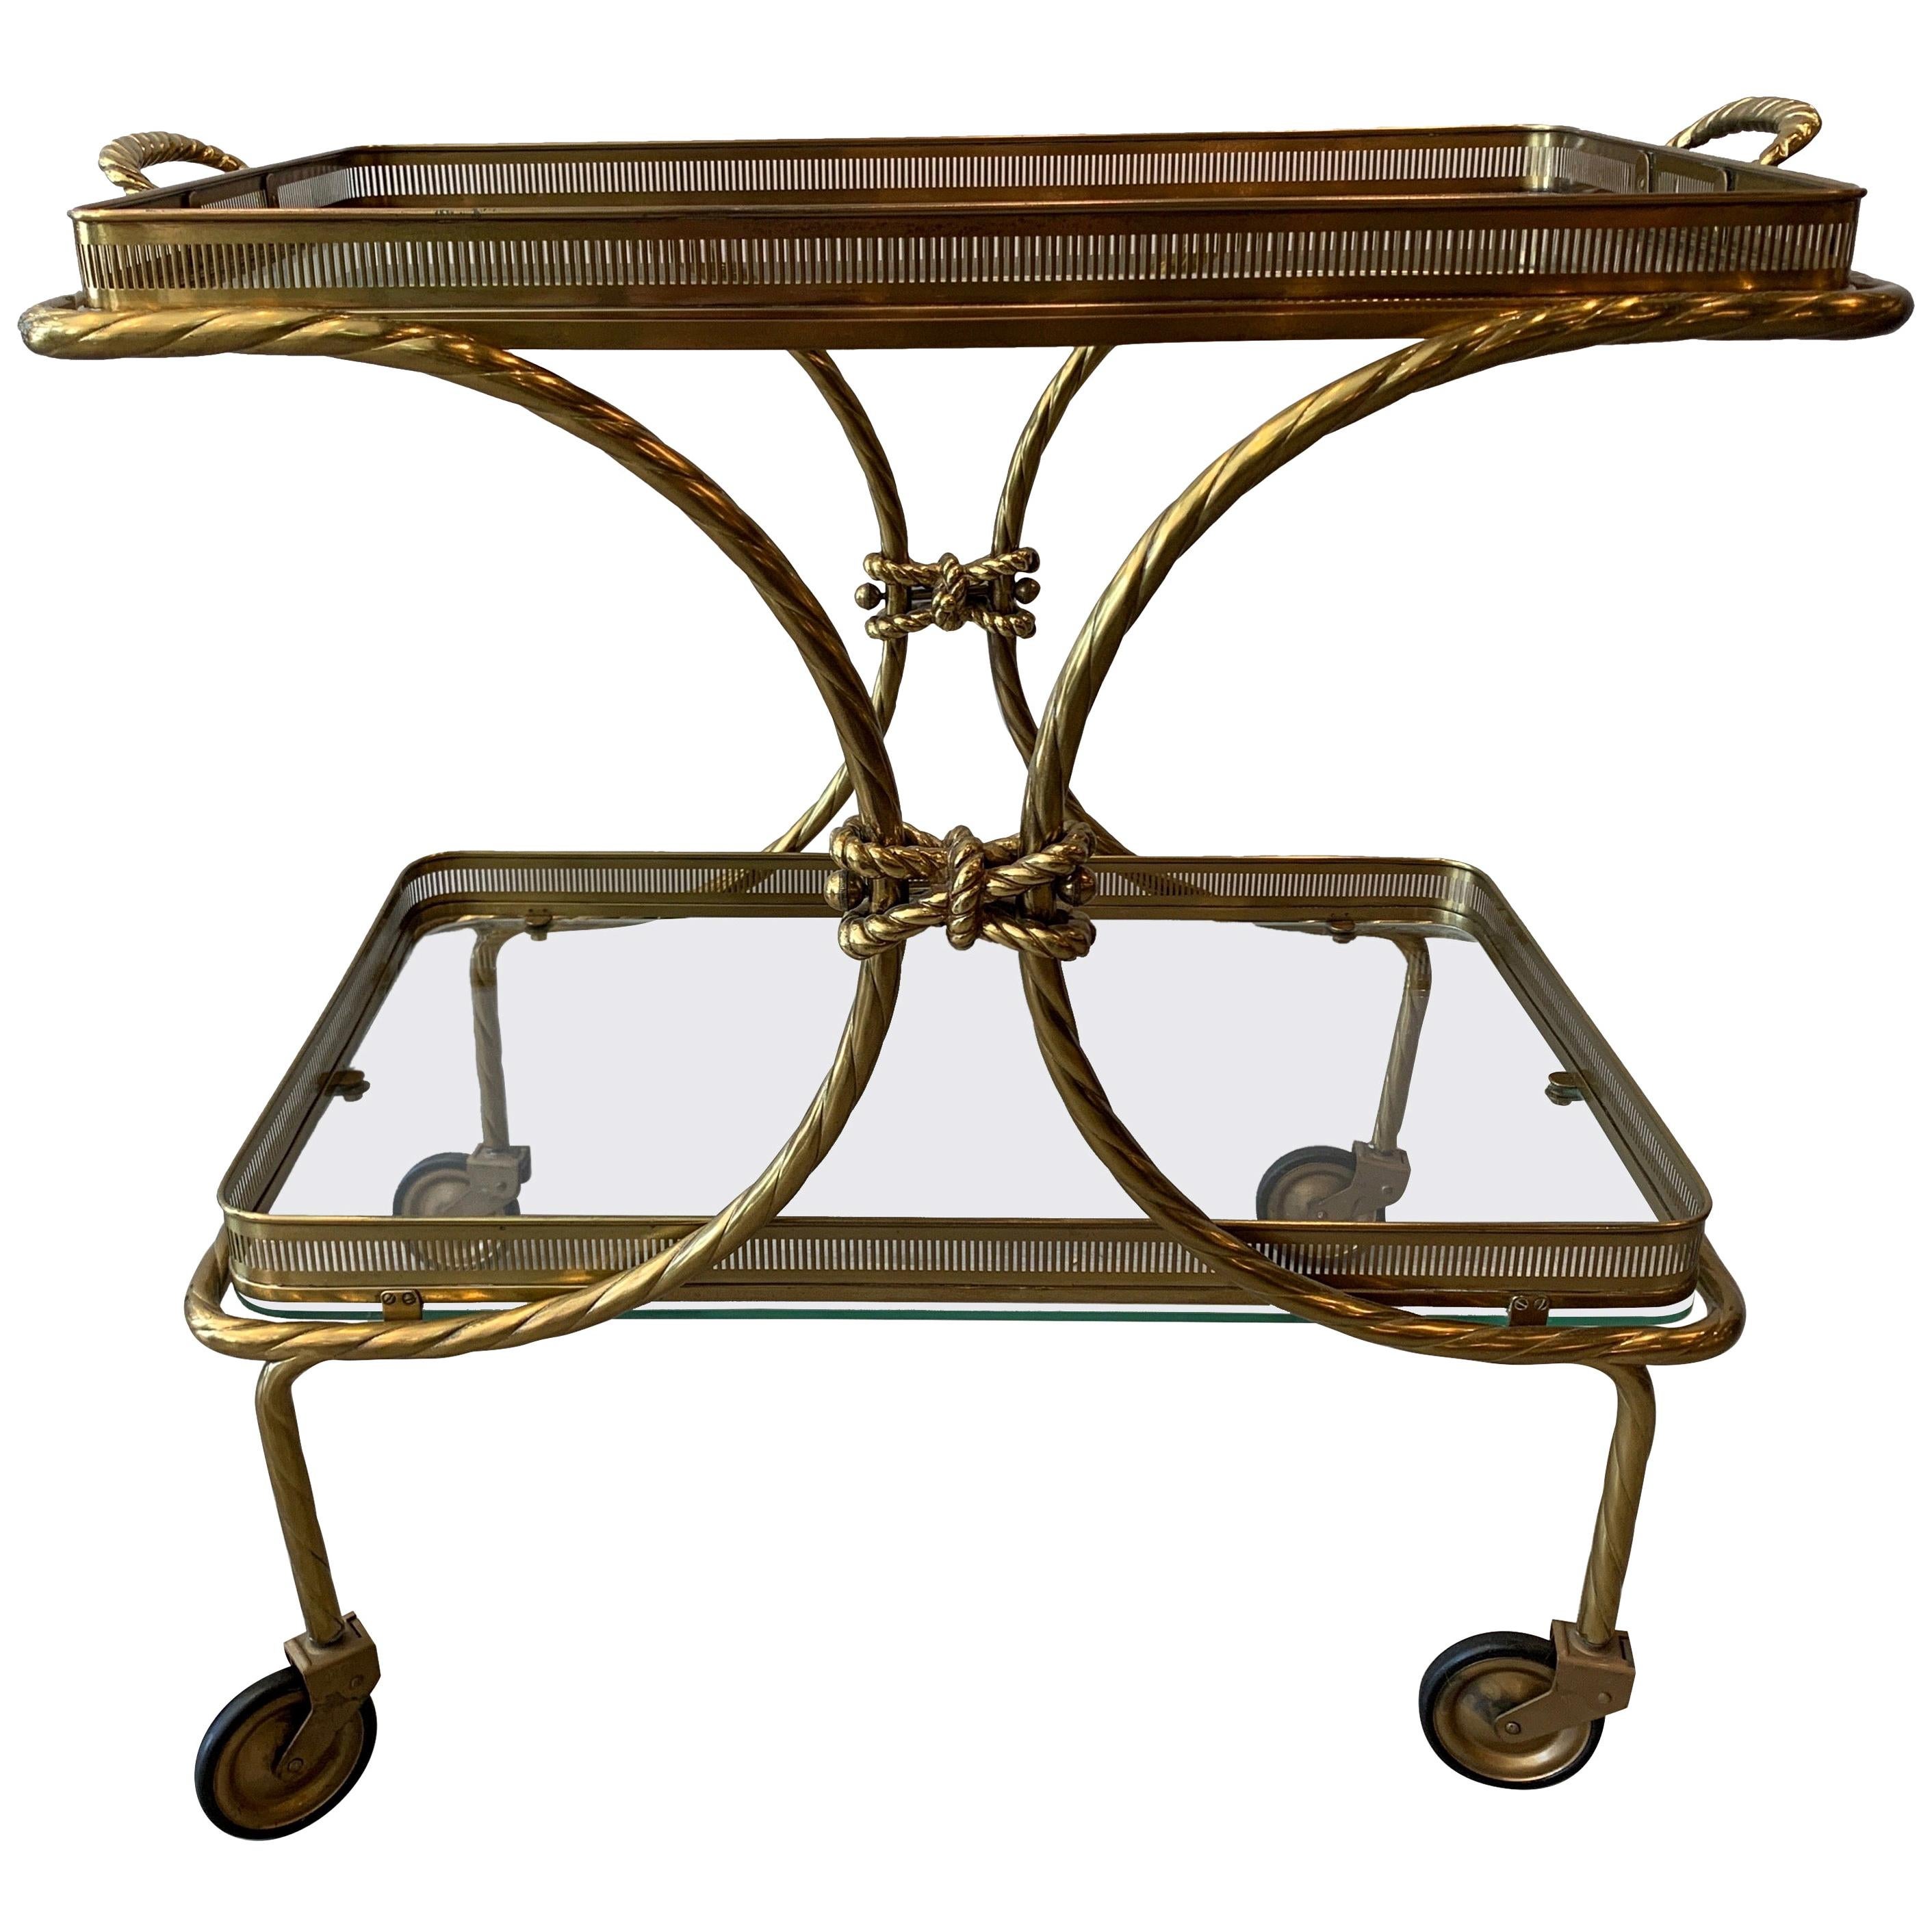 Midcentury Brass Tea Cart with Removable Top Tray and Twist Tassel Design